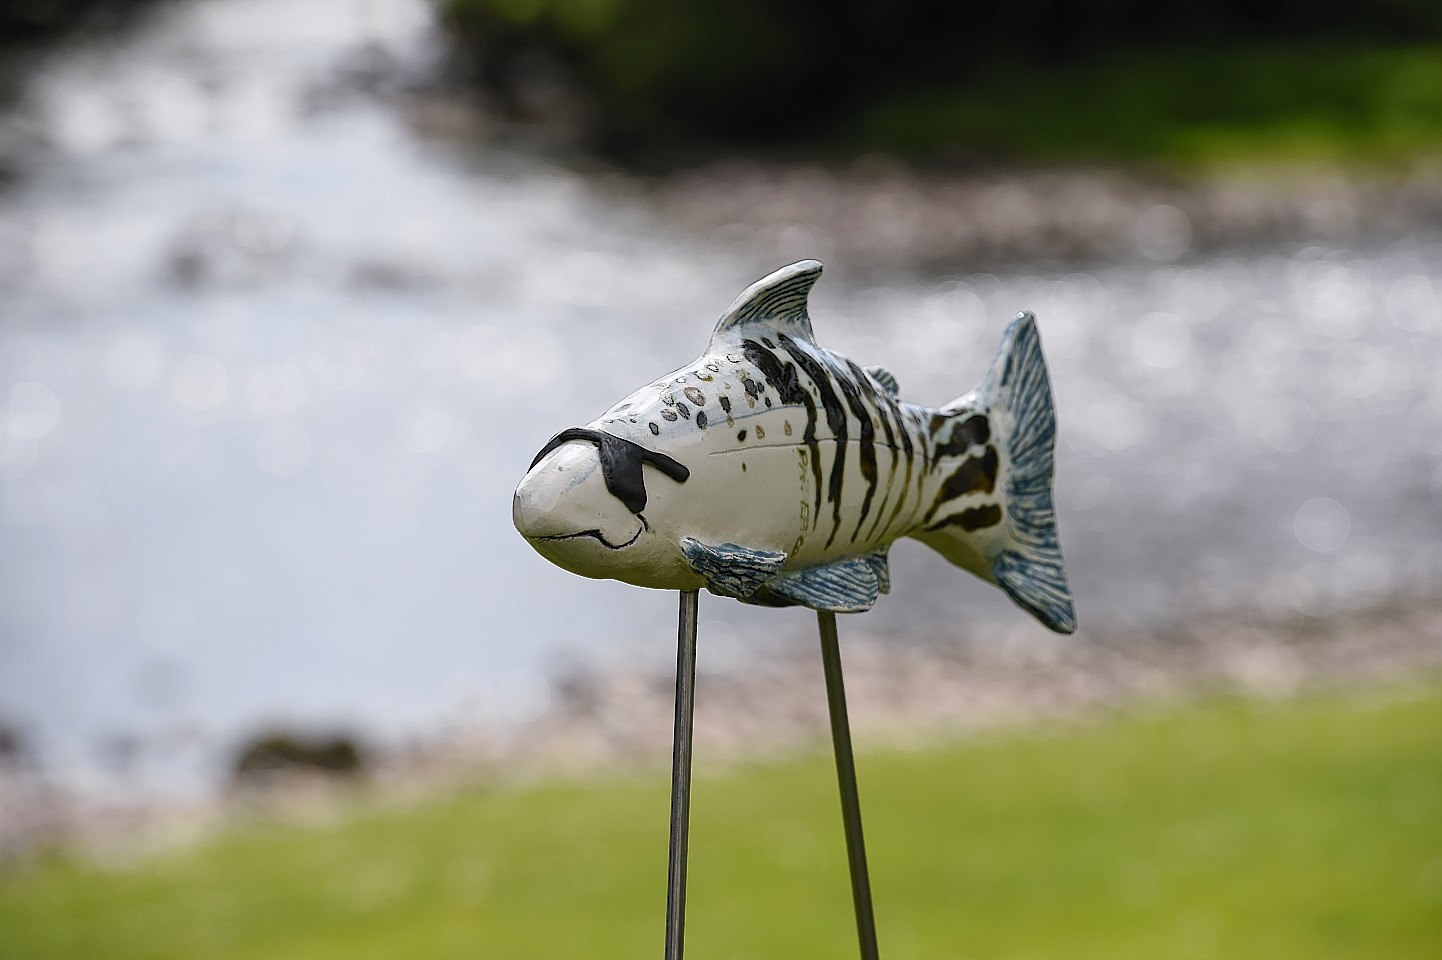 The River of Fish exhibition in Banchory